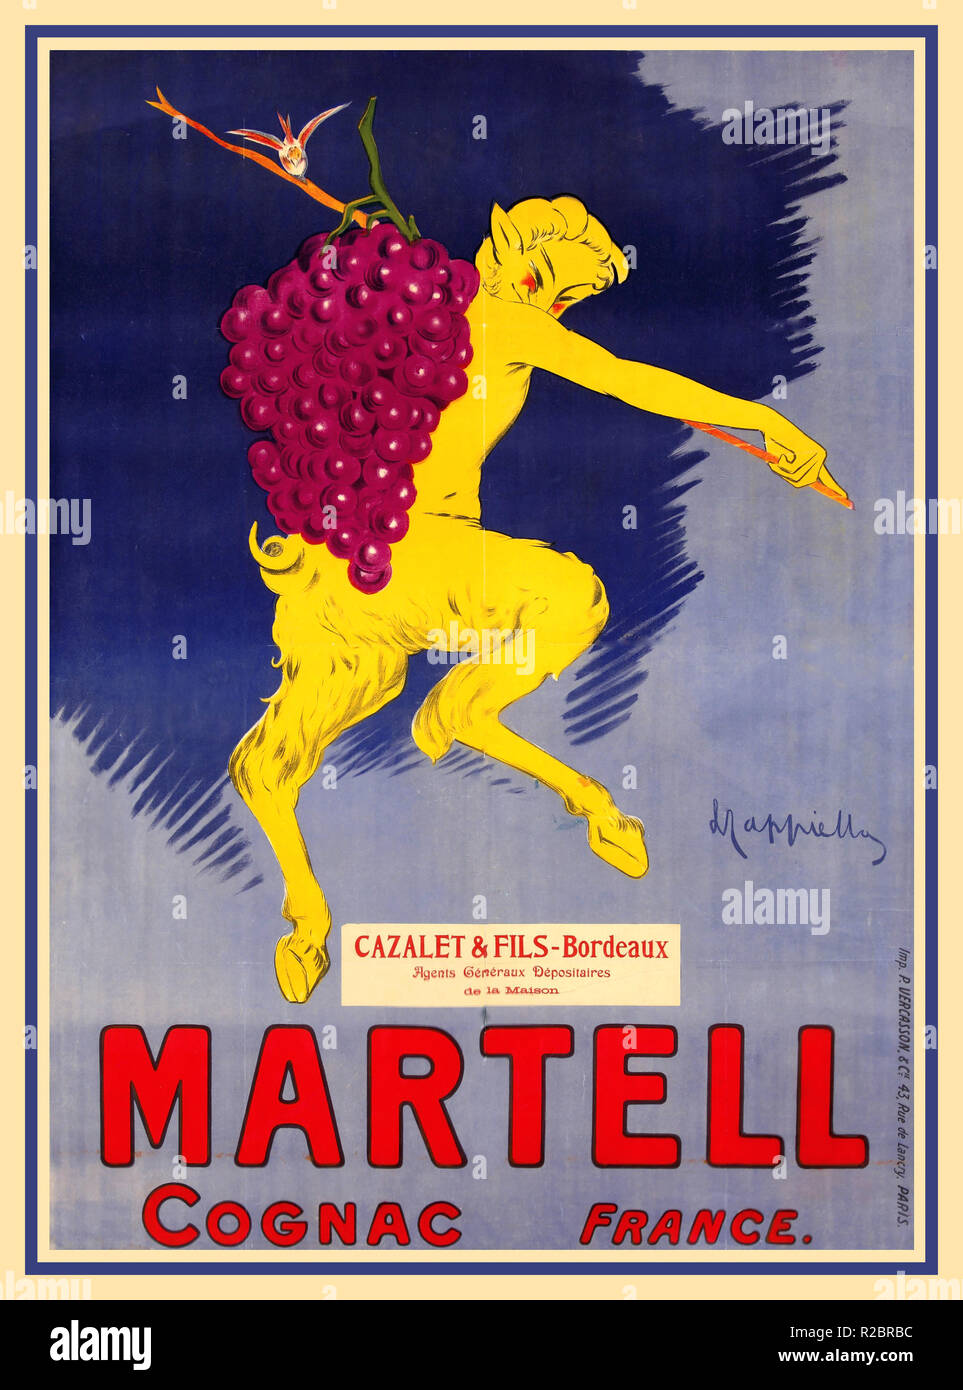 Vintage Cappiello Poster 1905 for French Cognac Martell France Agents Cazalet & Fils-Bordeaux Vertical French wine and spirits poster featuring a yellow satyr (half man/ half goat) carrying a bunch of grapes Historic Vintage Drink Drinks Alcohol Spirits Advertising Stock Photo